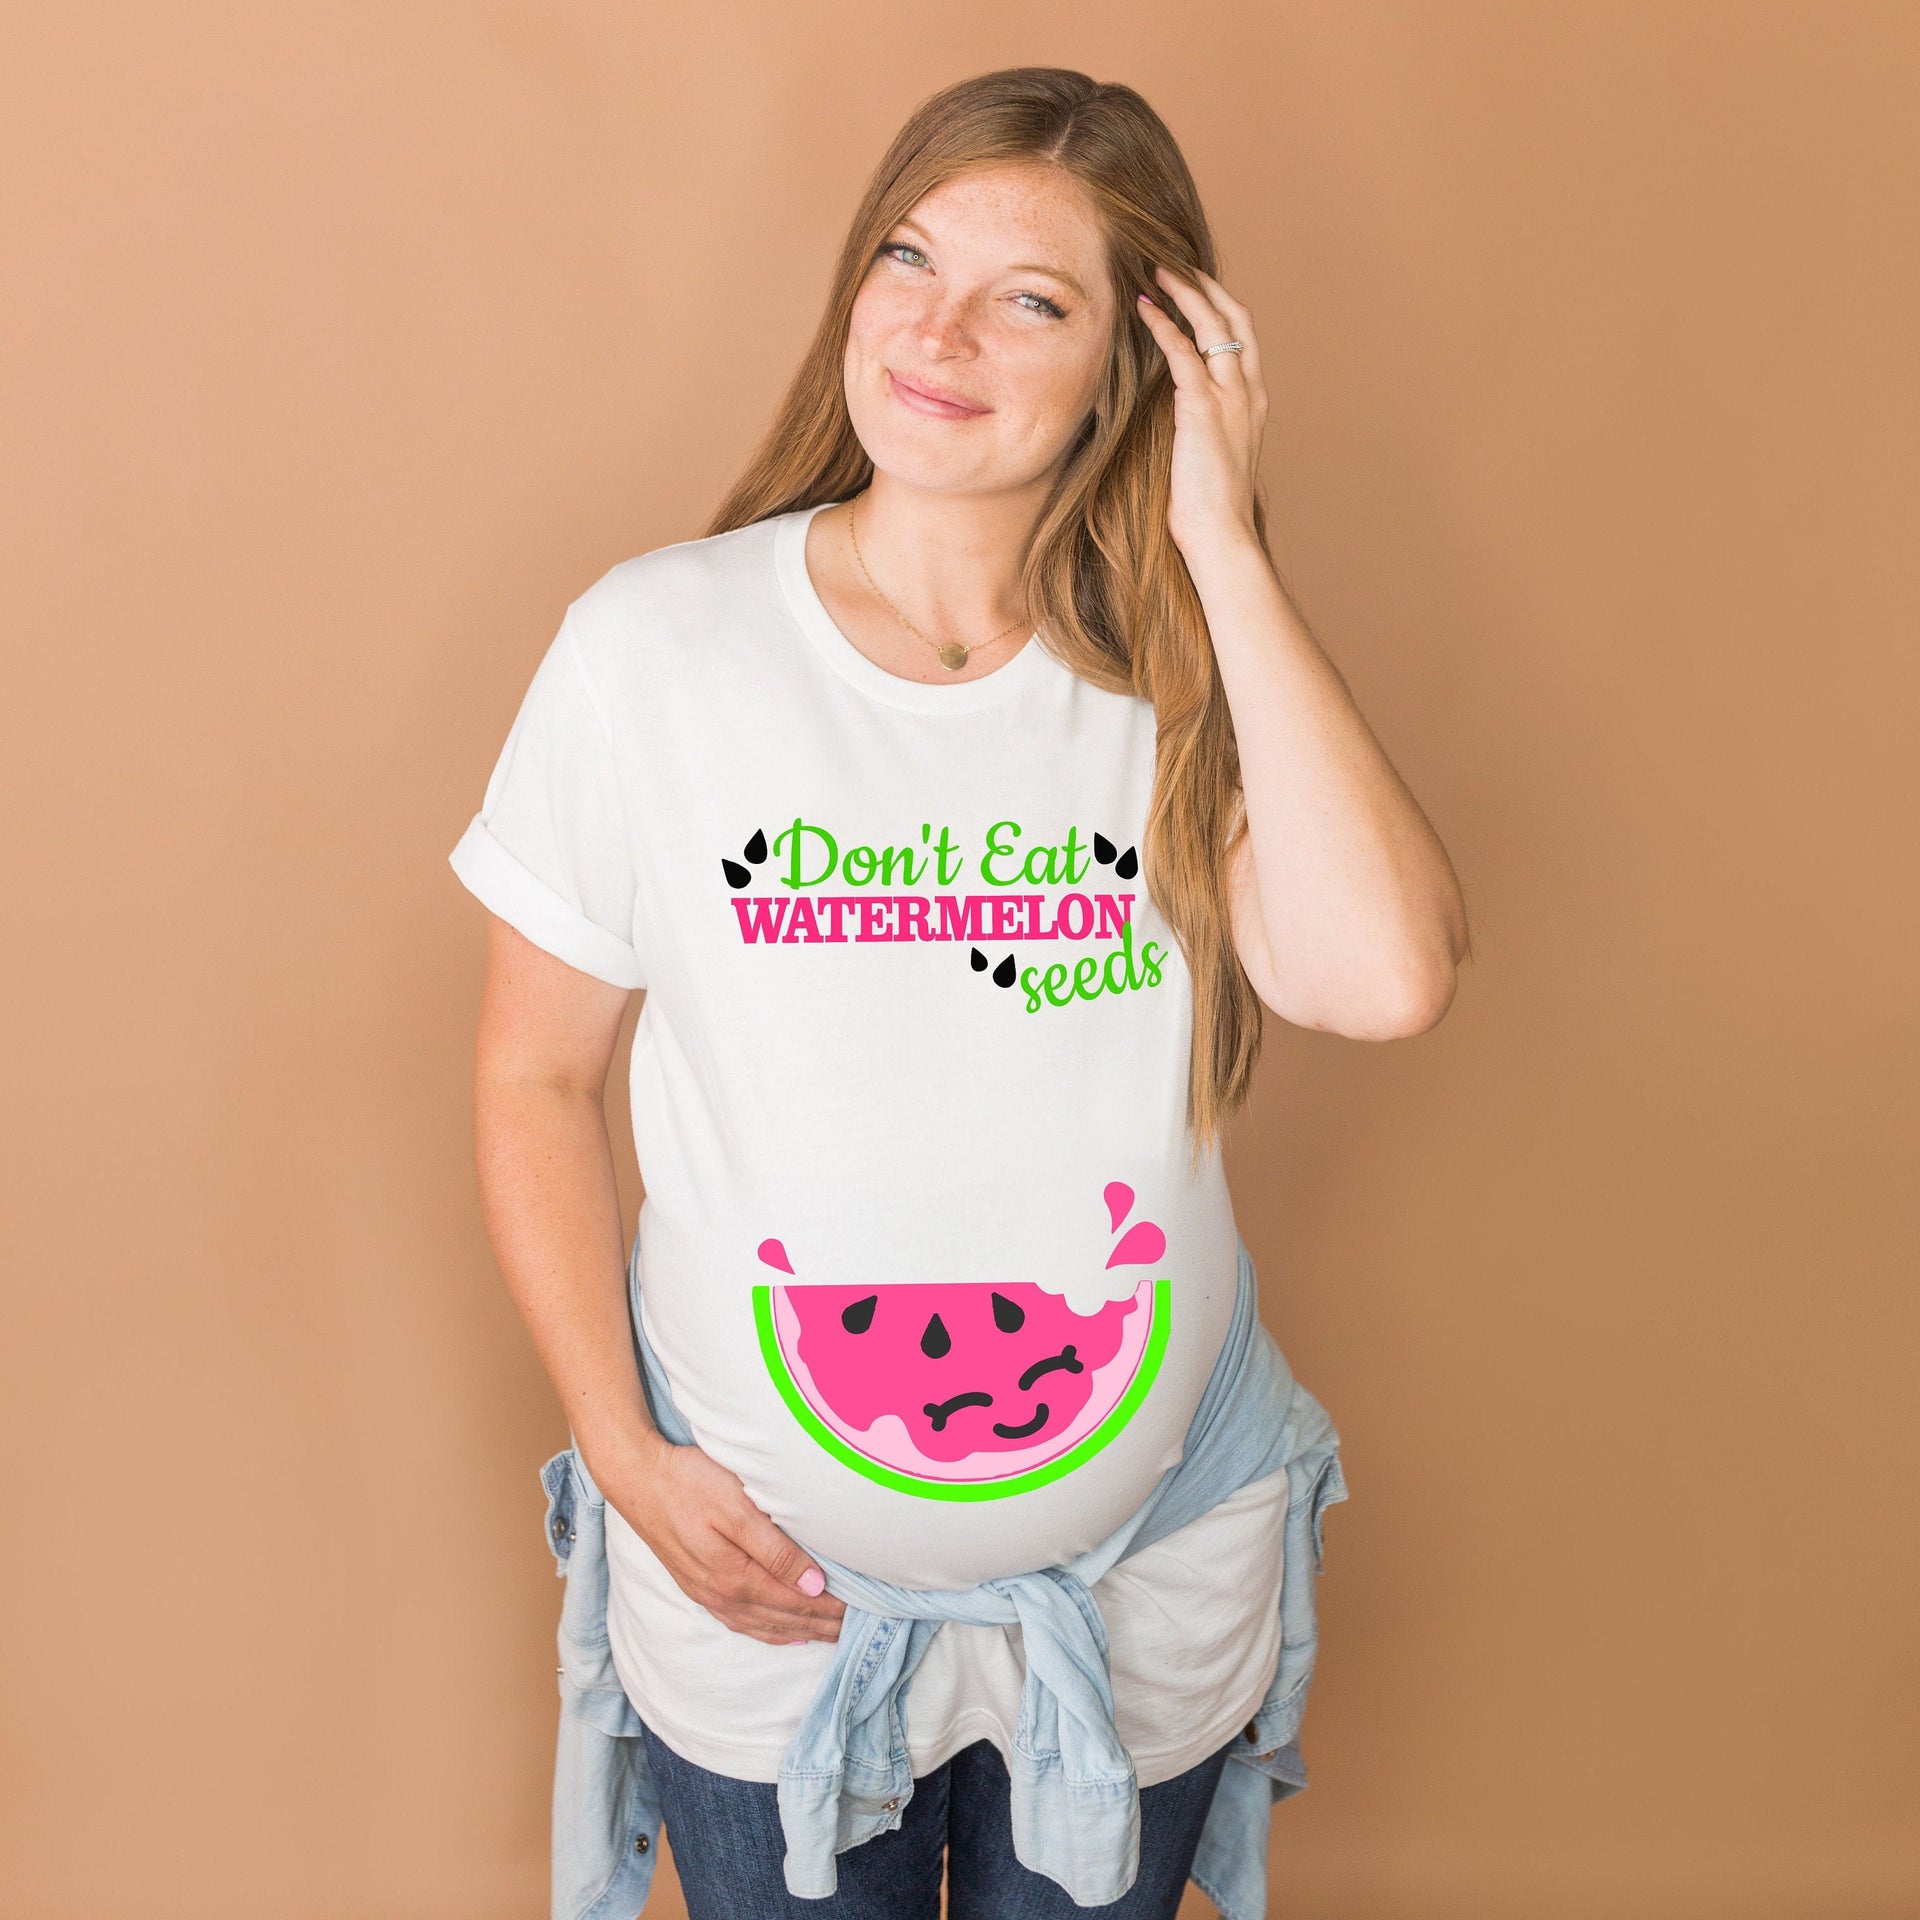 Funny Pregnancy Shirts Dont Eat Watermelon Seeds S